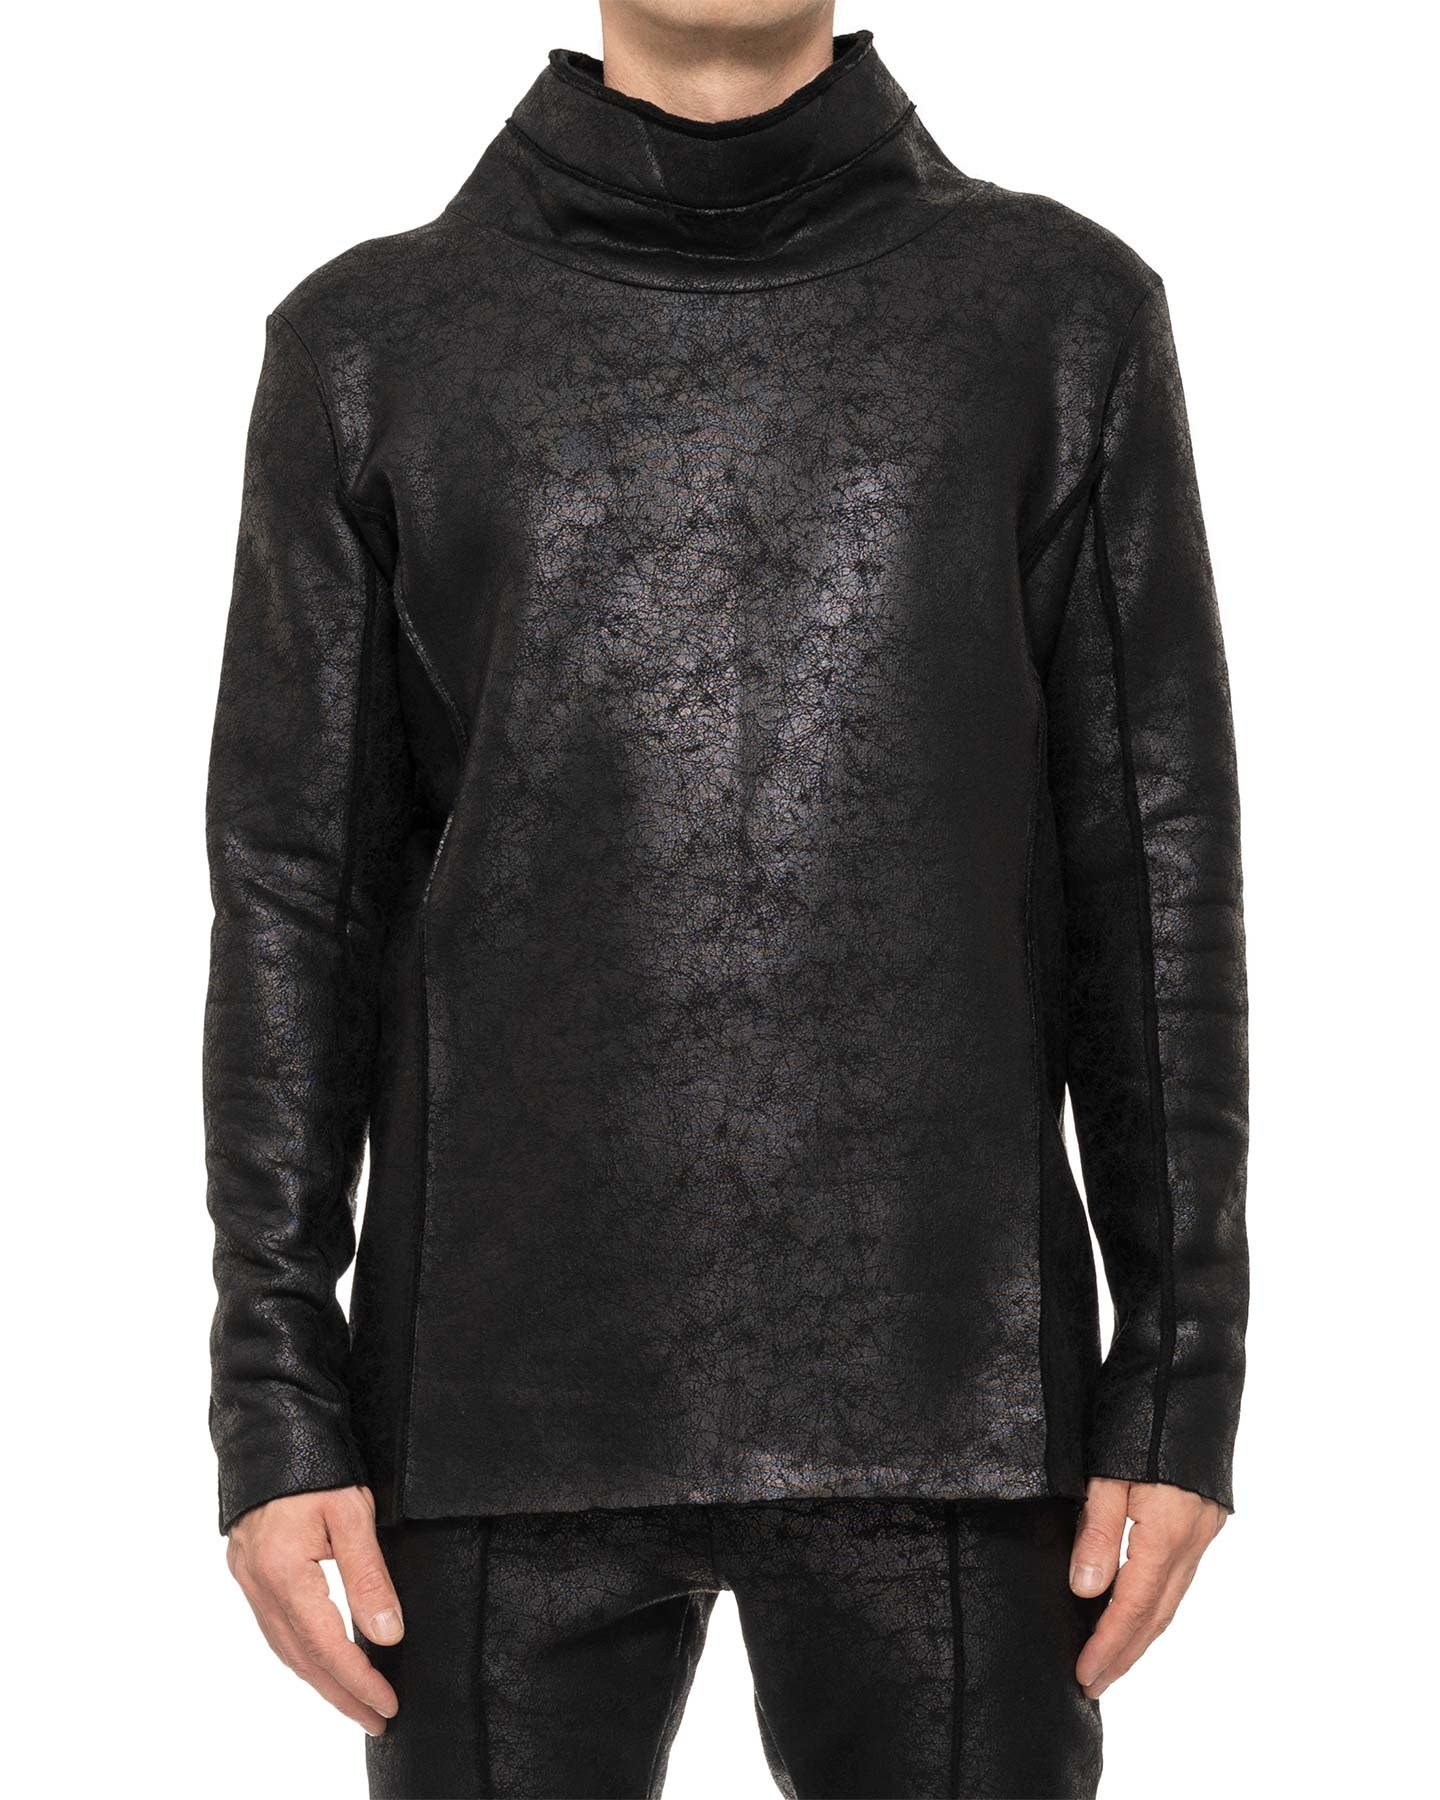 HIGH NECK LEATHER EFFECT LONG SLEEVE